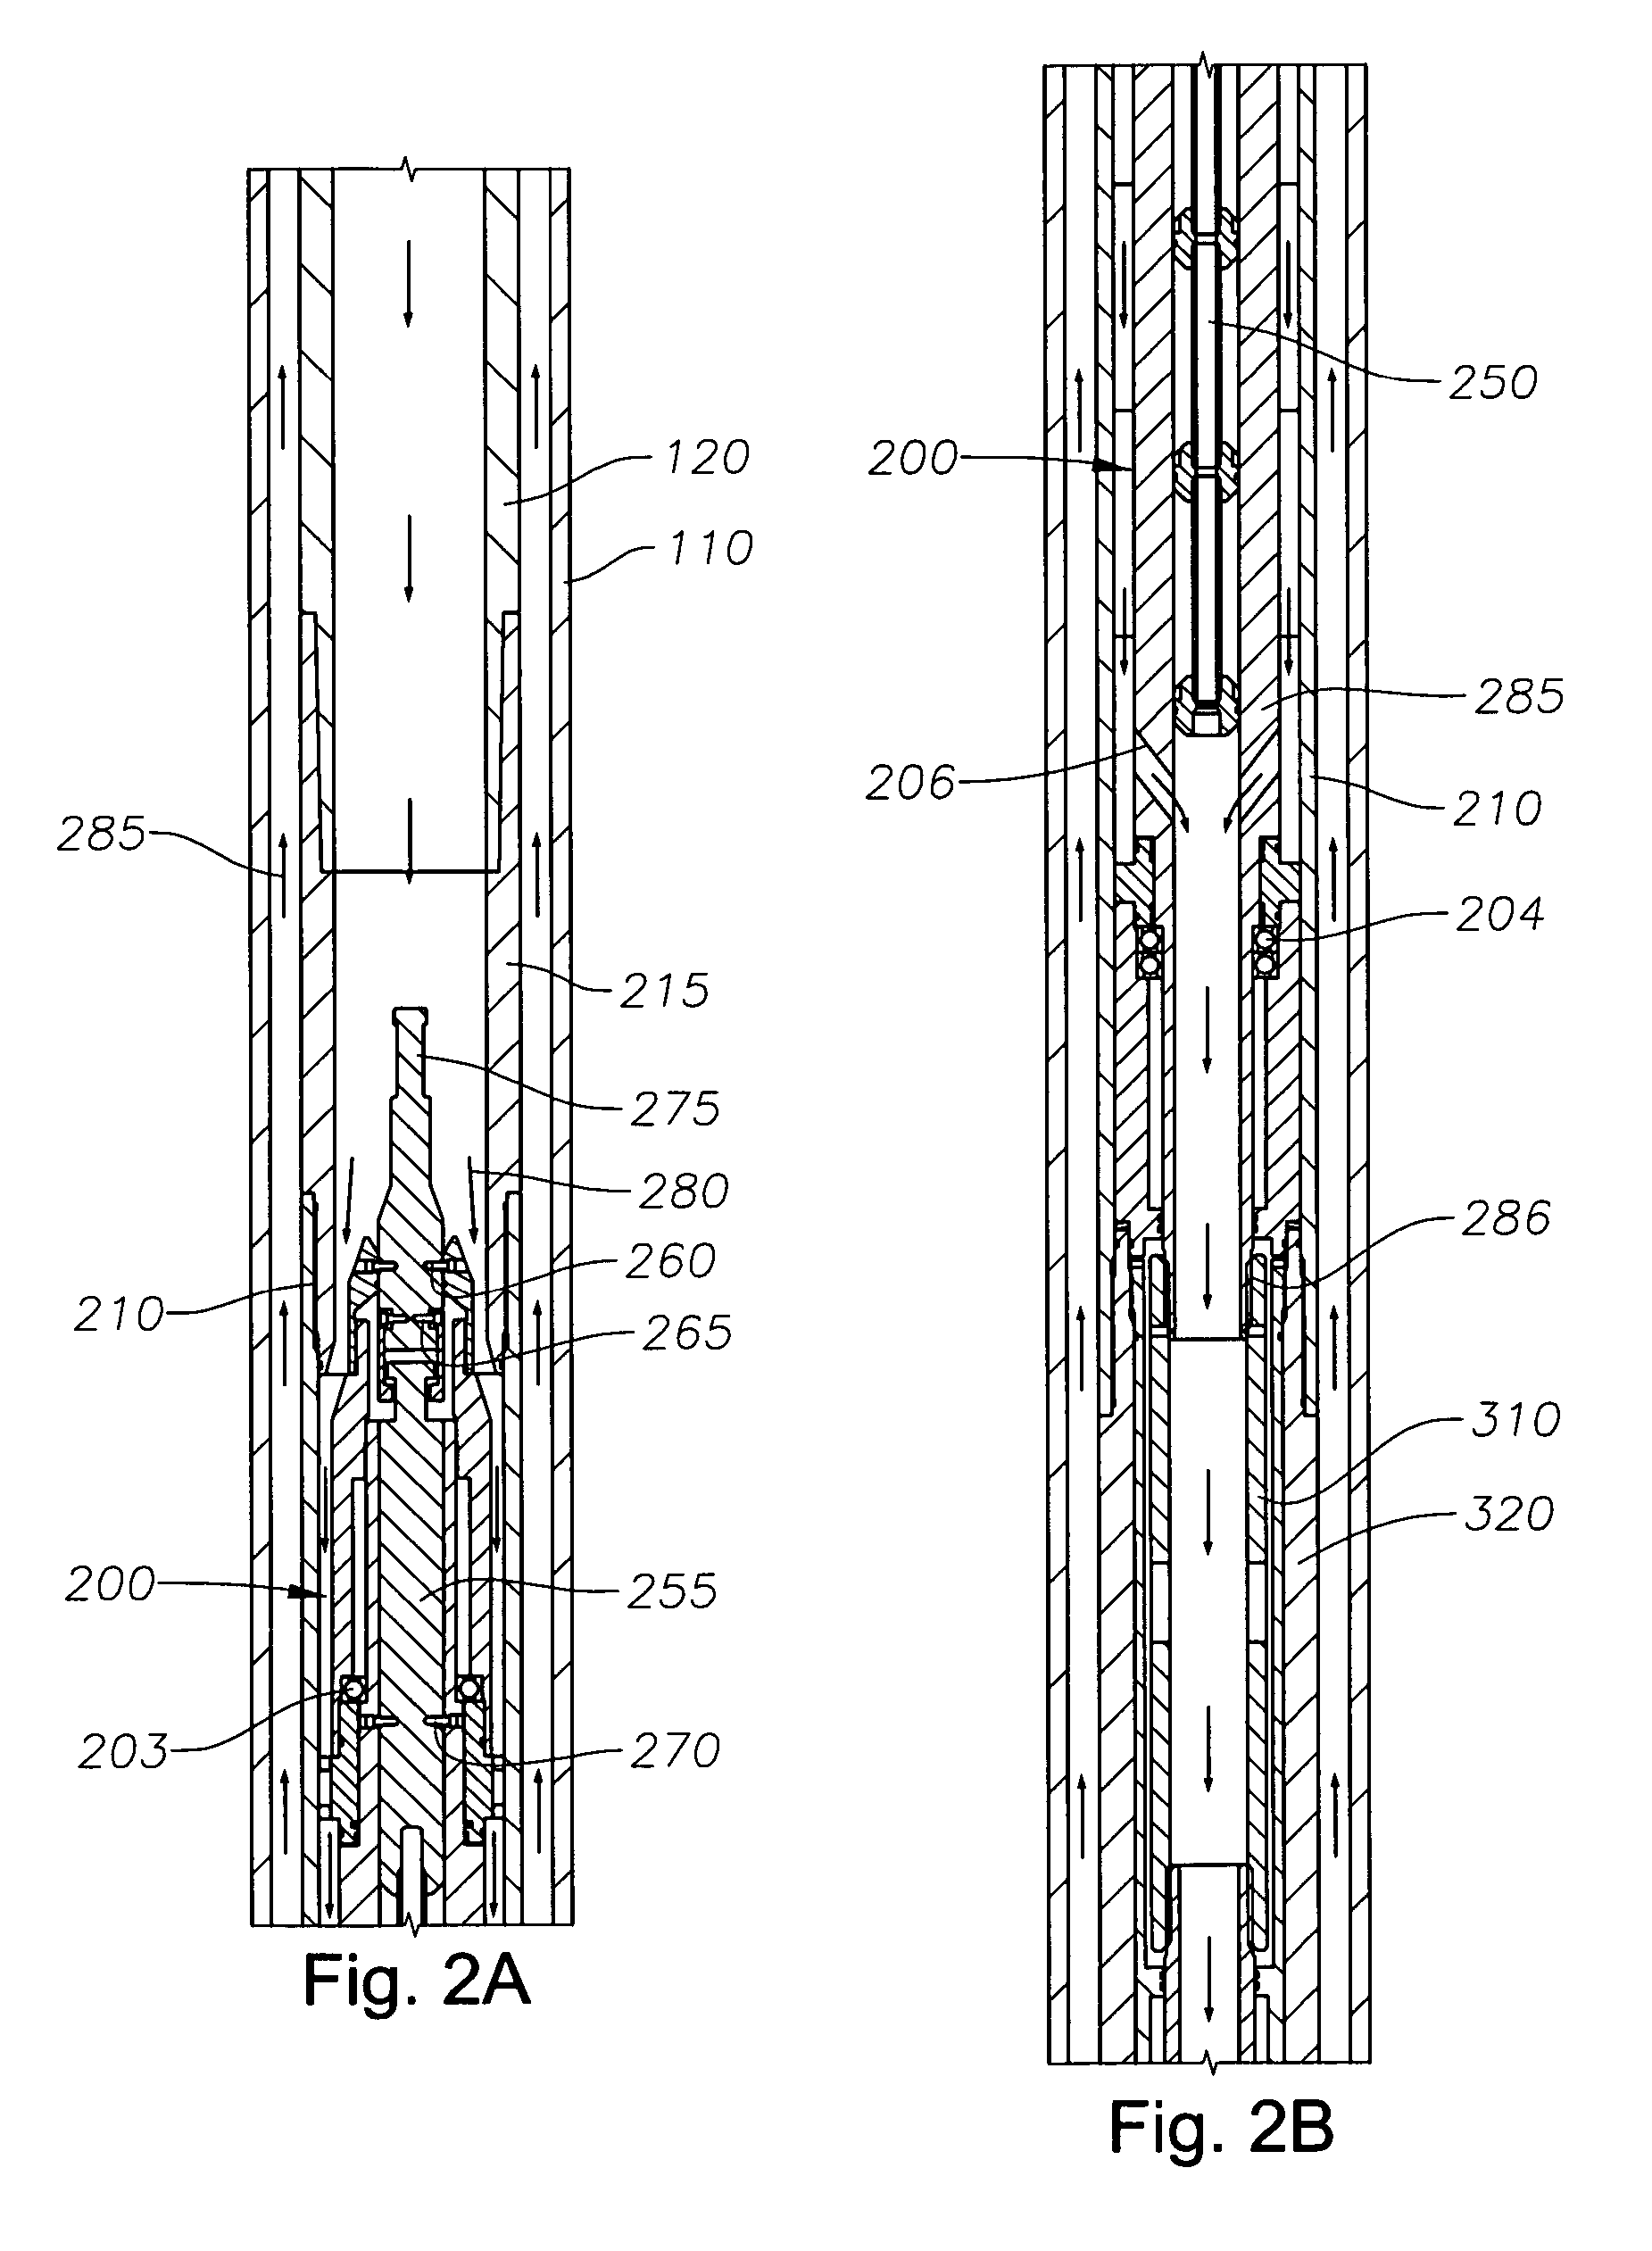 Method for completing a well using increased fluid temperature